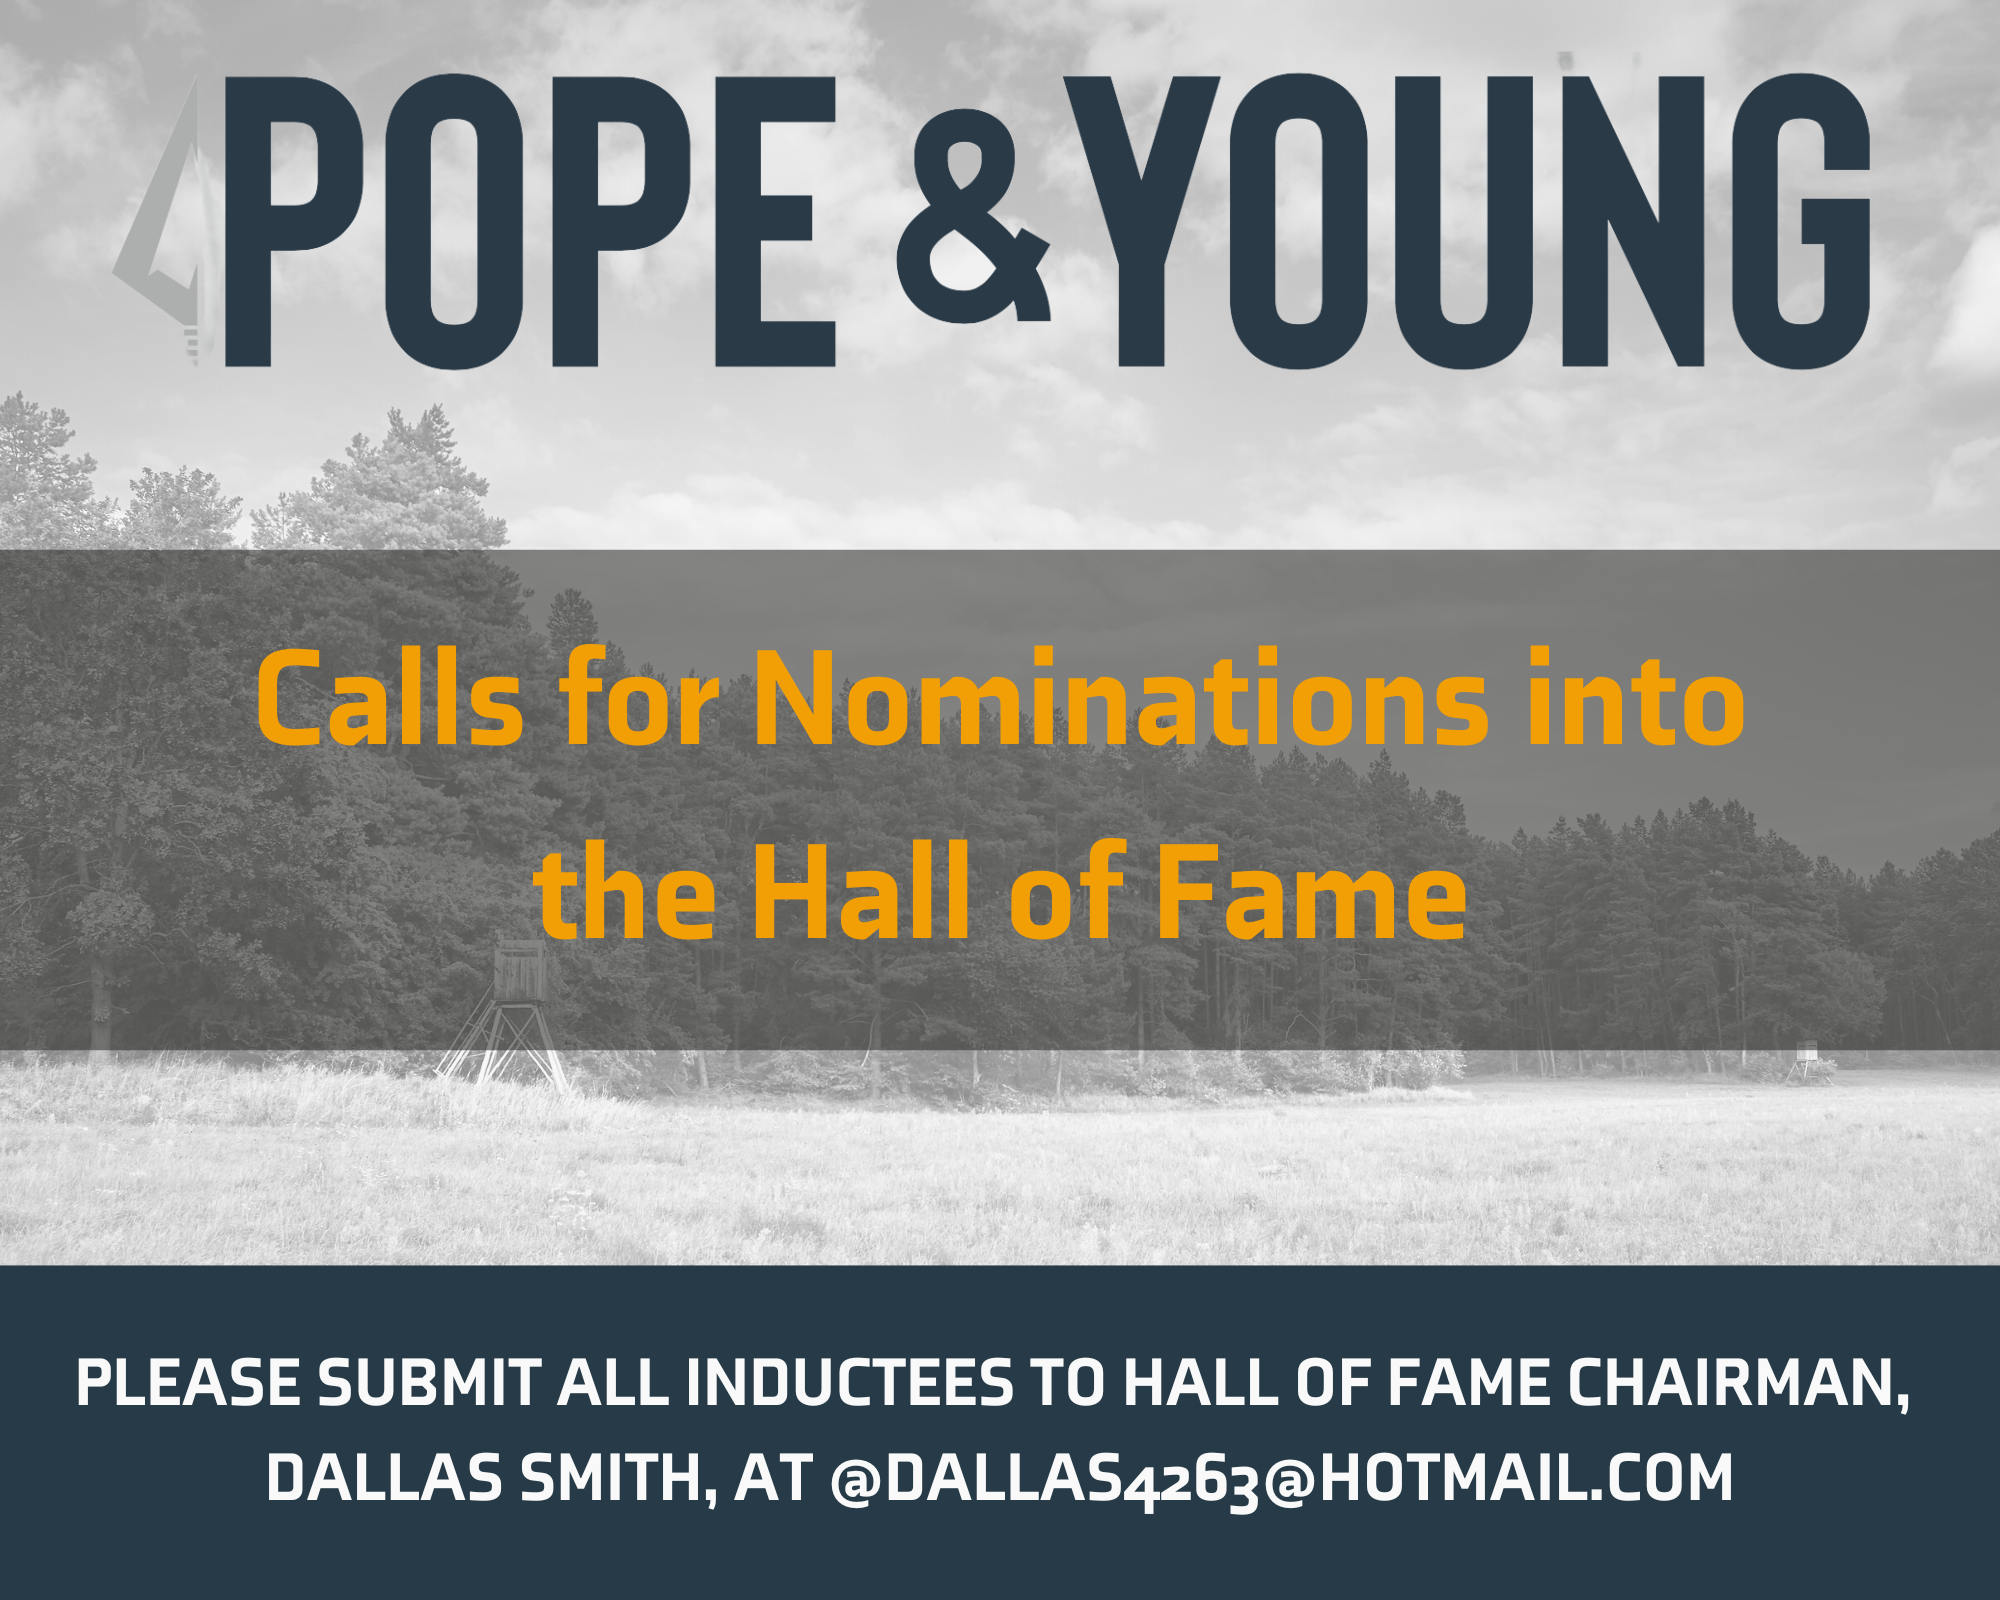 
Pope and Young Calls for Nominations into the Hall of Fame